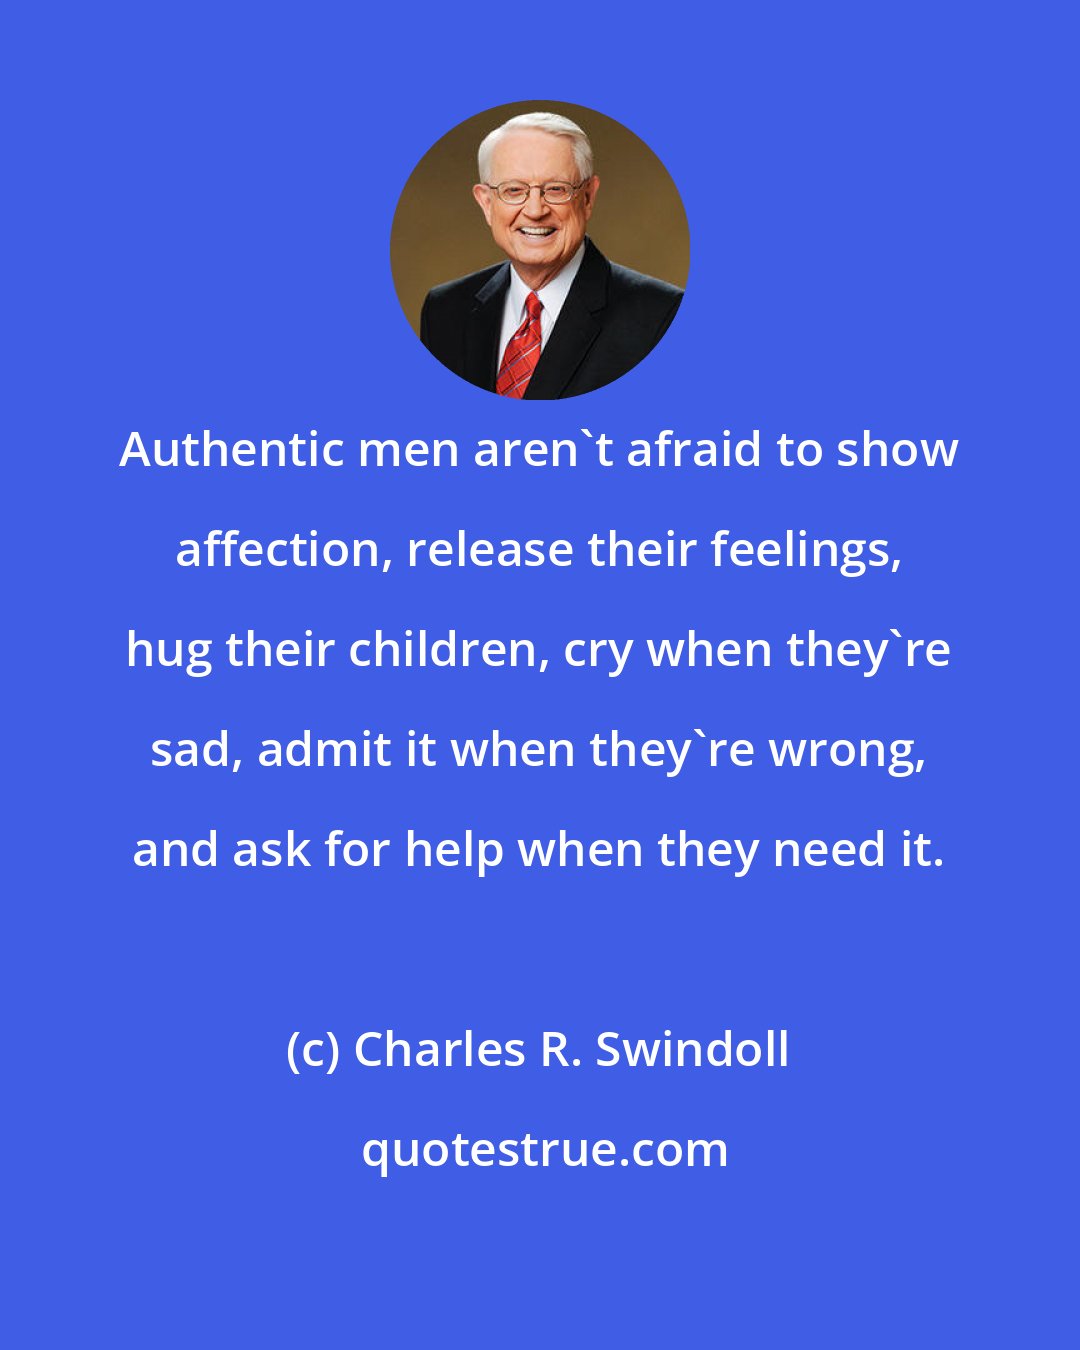 Charles R. Swindoll: Authentic men aren't afraid to show affection, release their feelings, hug their children, cry when they're sad, admit it when they're wrong, and ask for help when they need it.